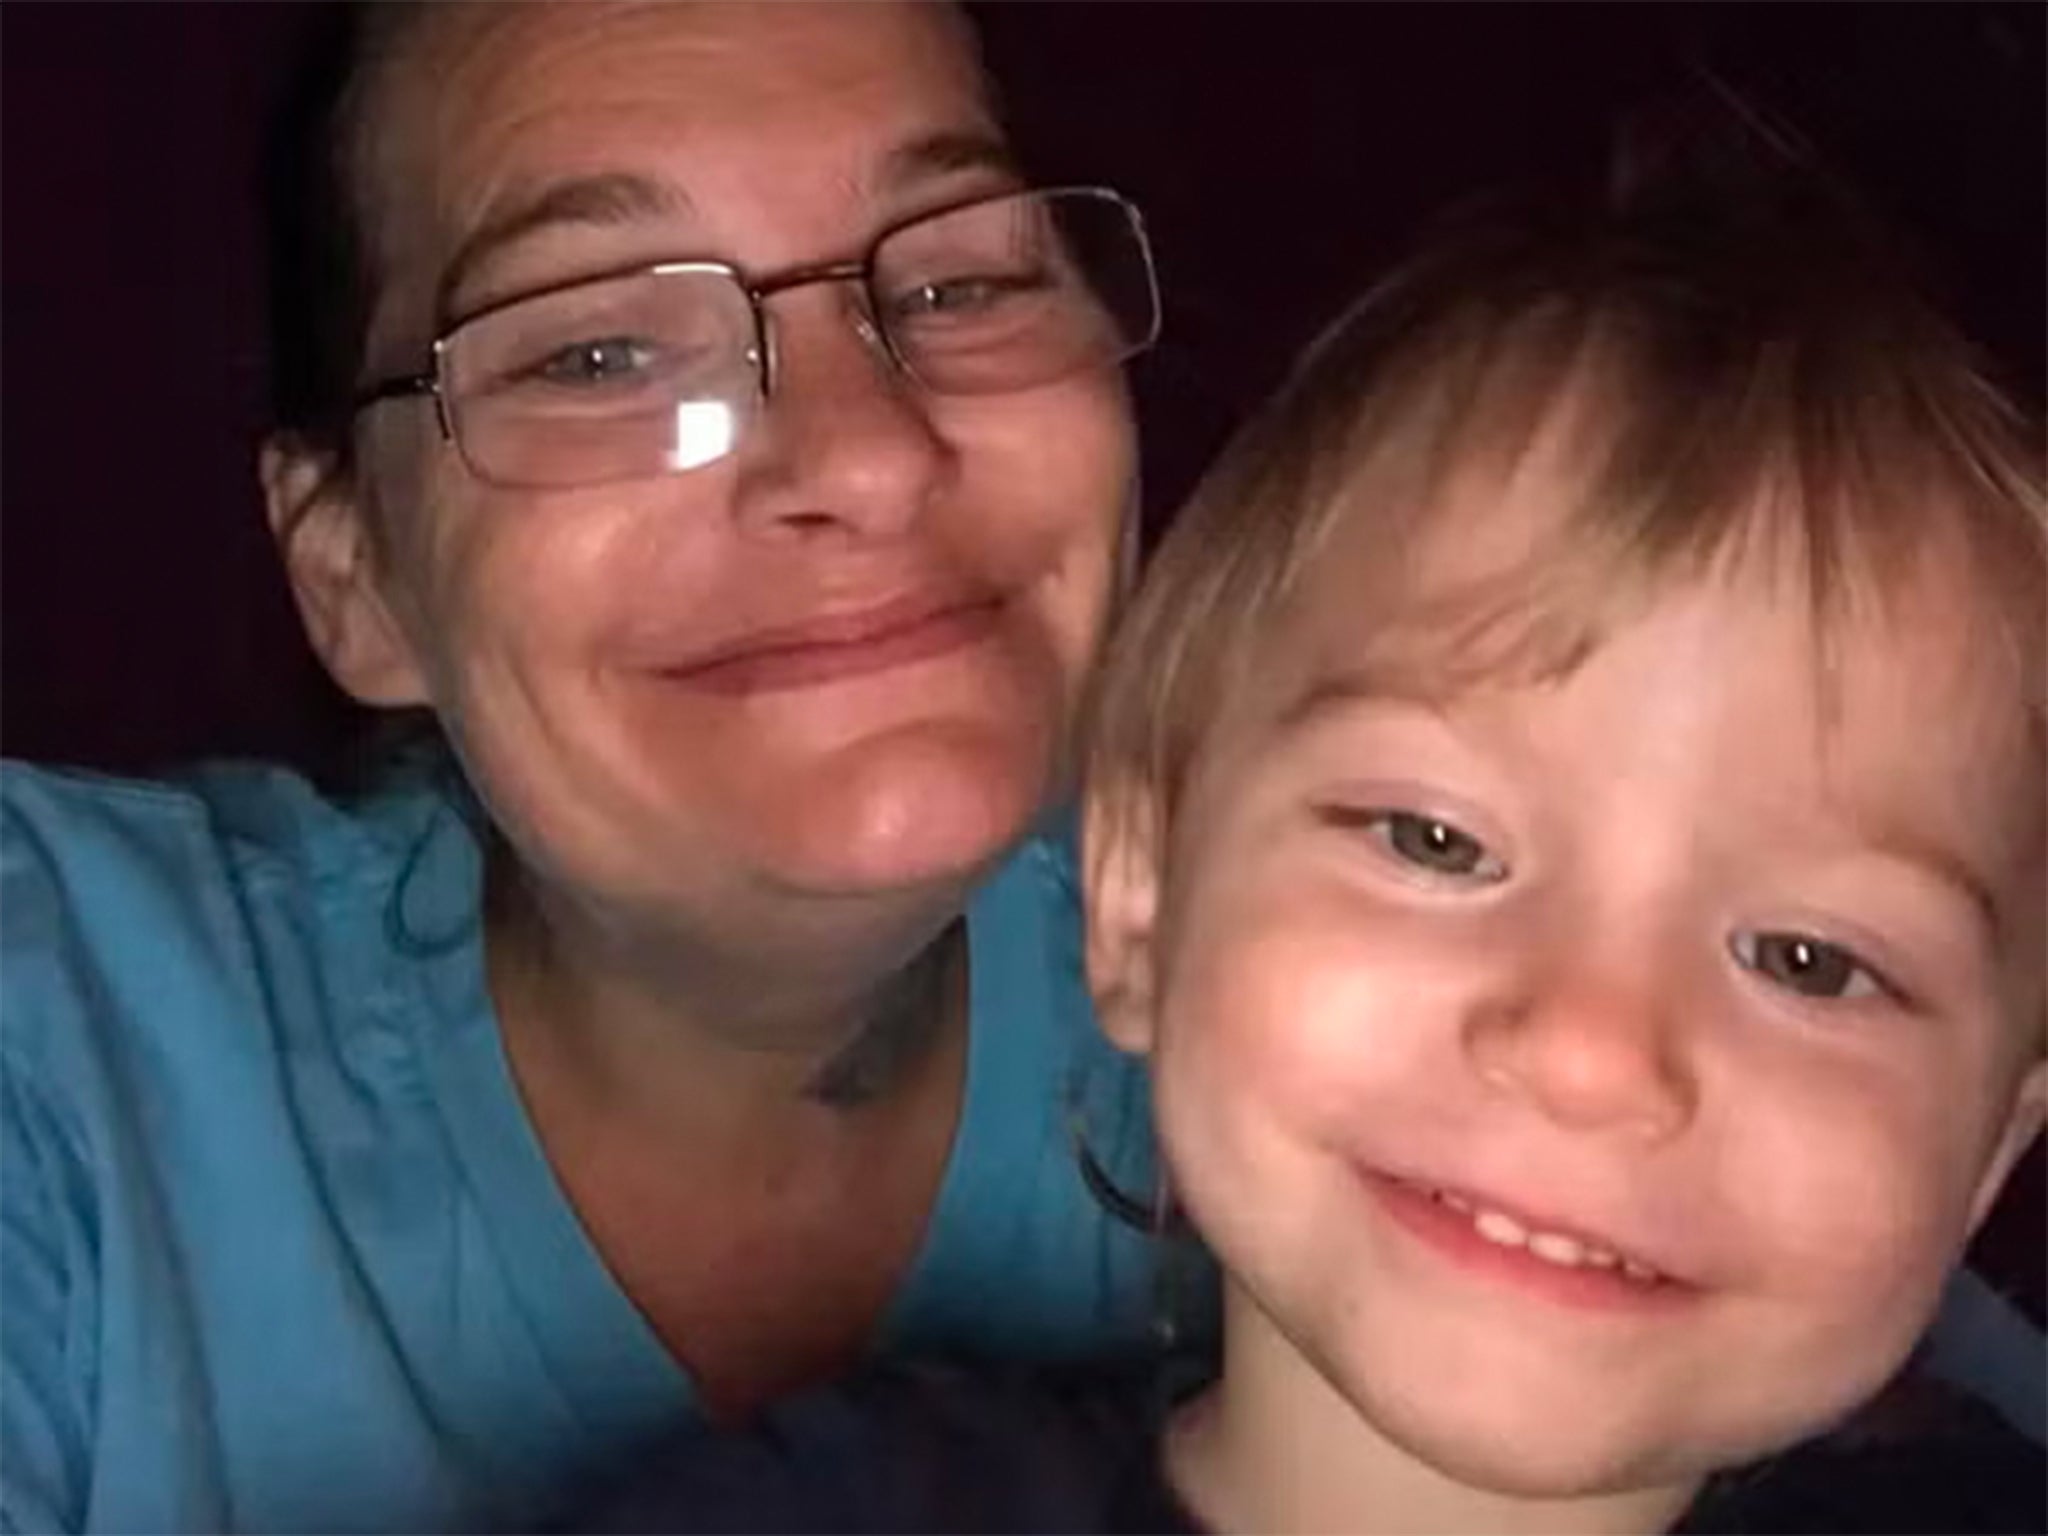 Bronson’s mother, Sarah Piesse, 43, said she was ‘haunted’ by the vision of her little boy desperately searching for food or water after his father died